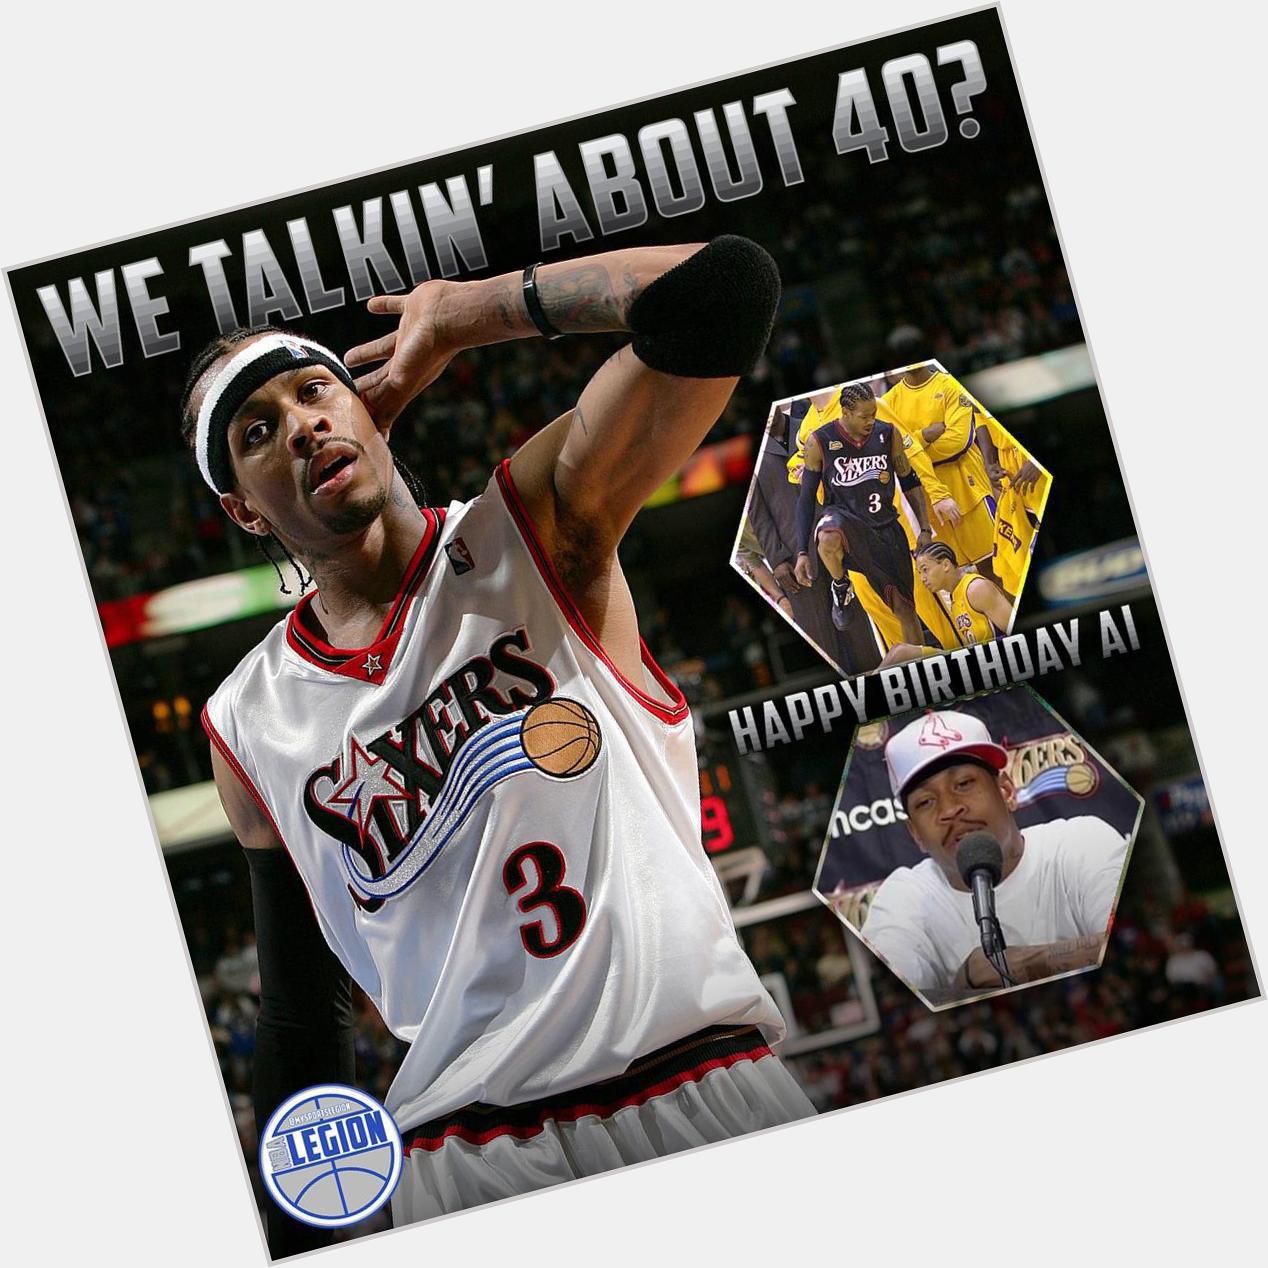 We talkin\ about 40? Happy birthday to the great Allen Iverson! 